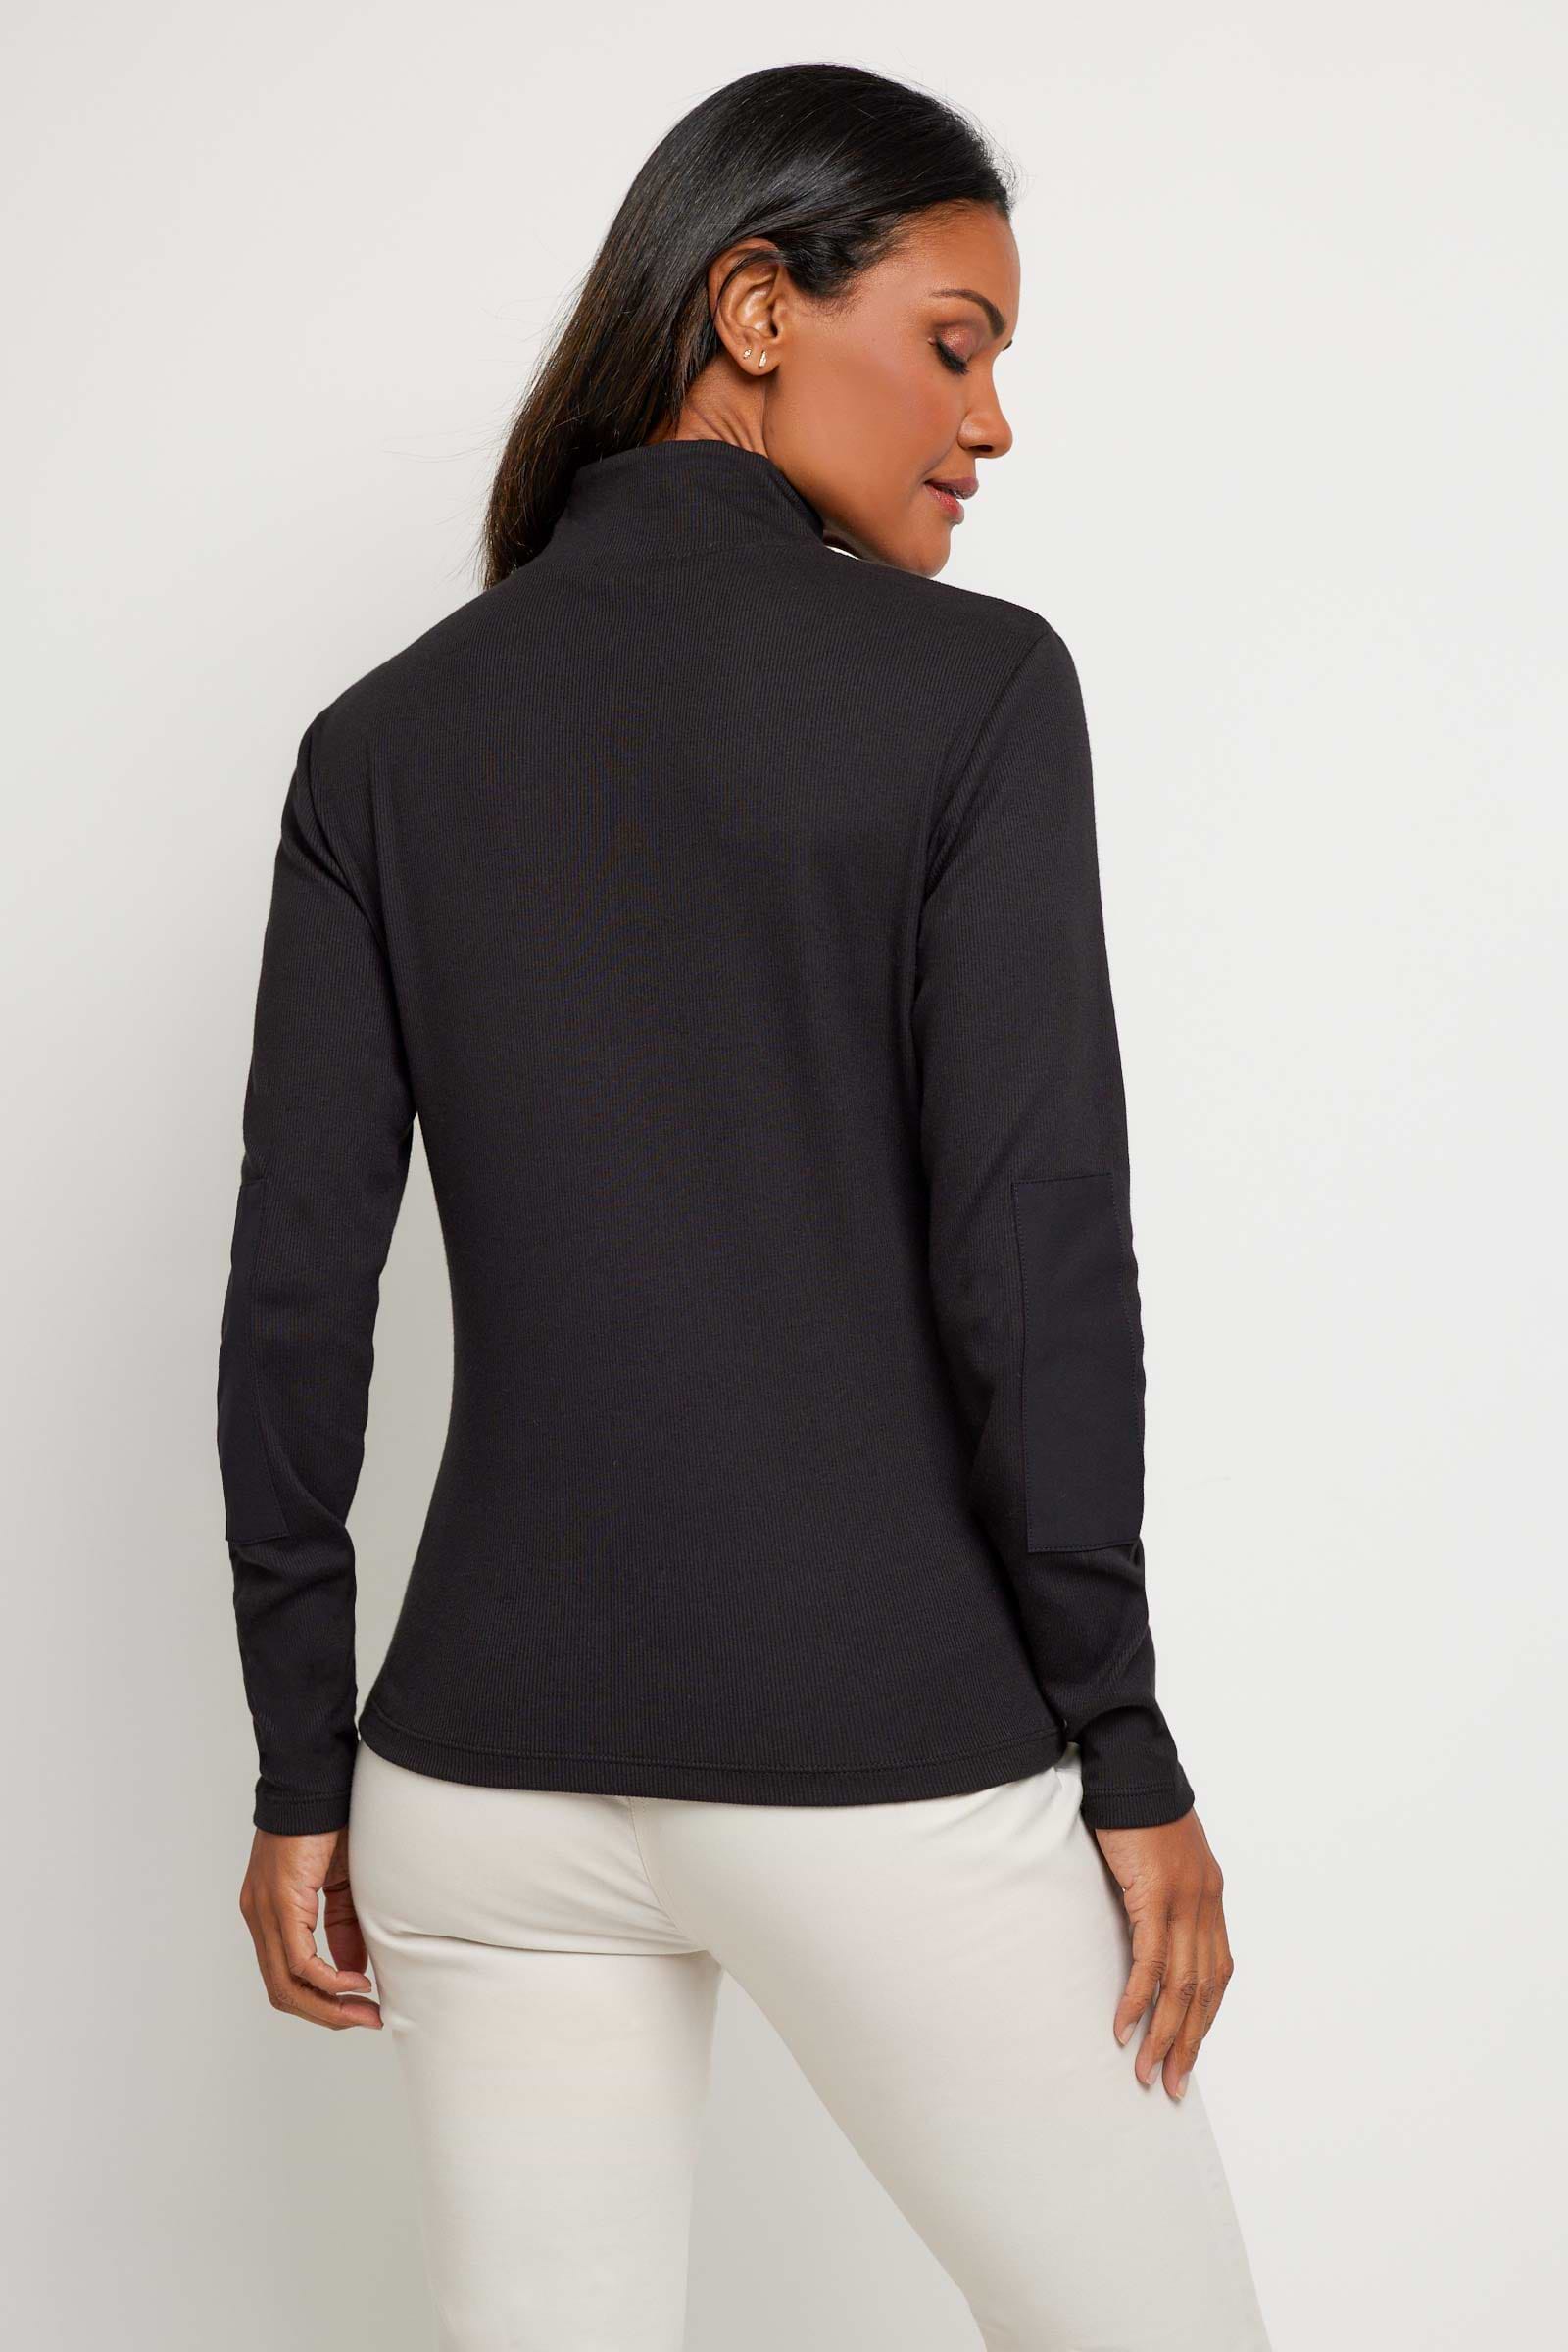 The Best Travel Top. Woman Showing the Back of a Monroe Henley Top in Black.